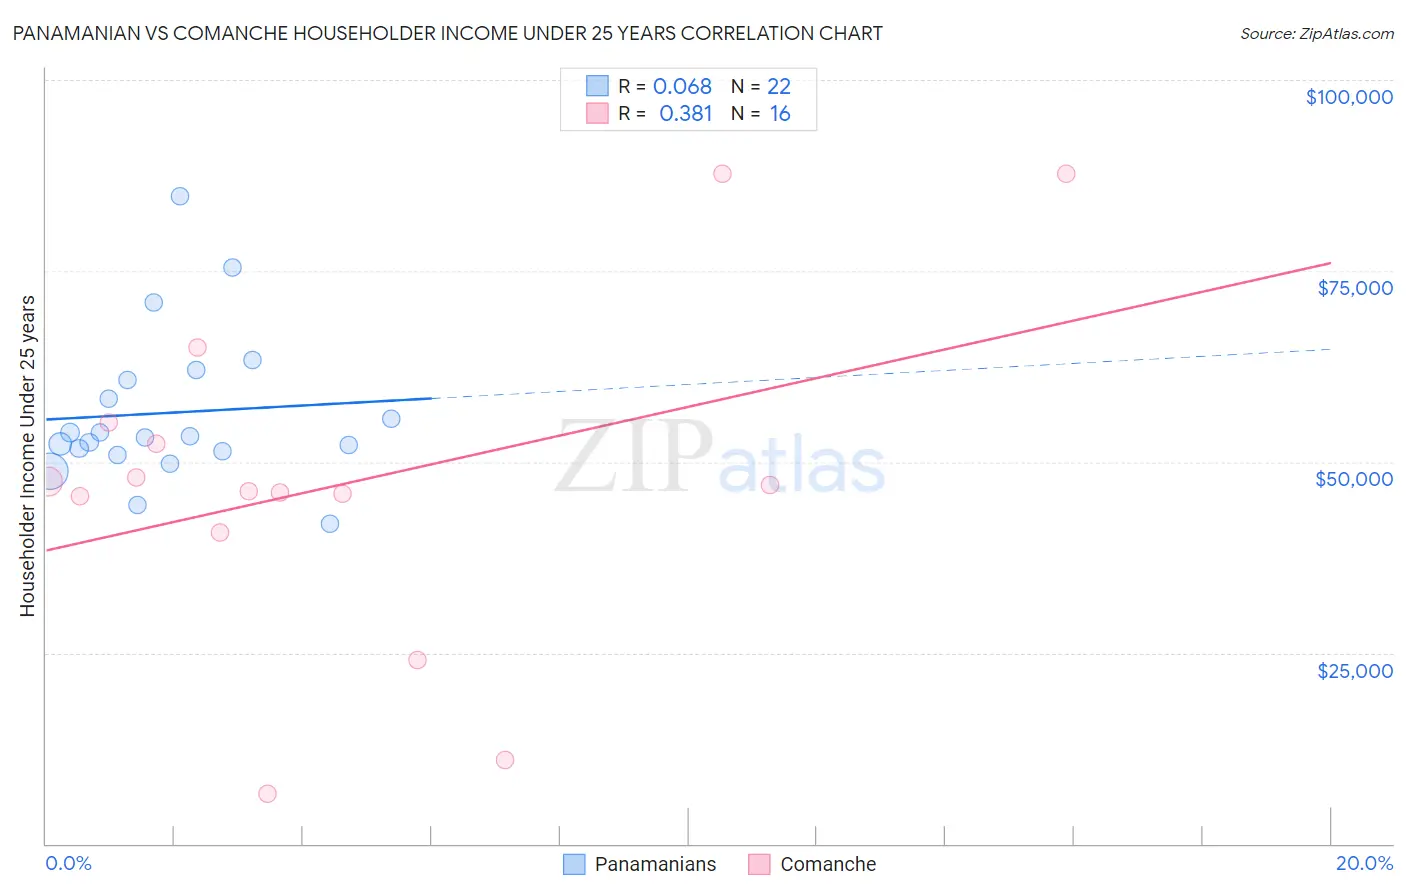 Panamanian vs Comanche Householder Income Under 25 years